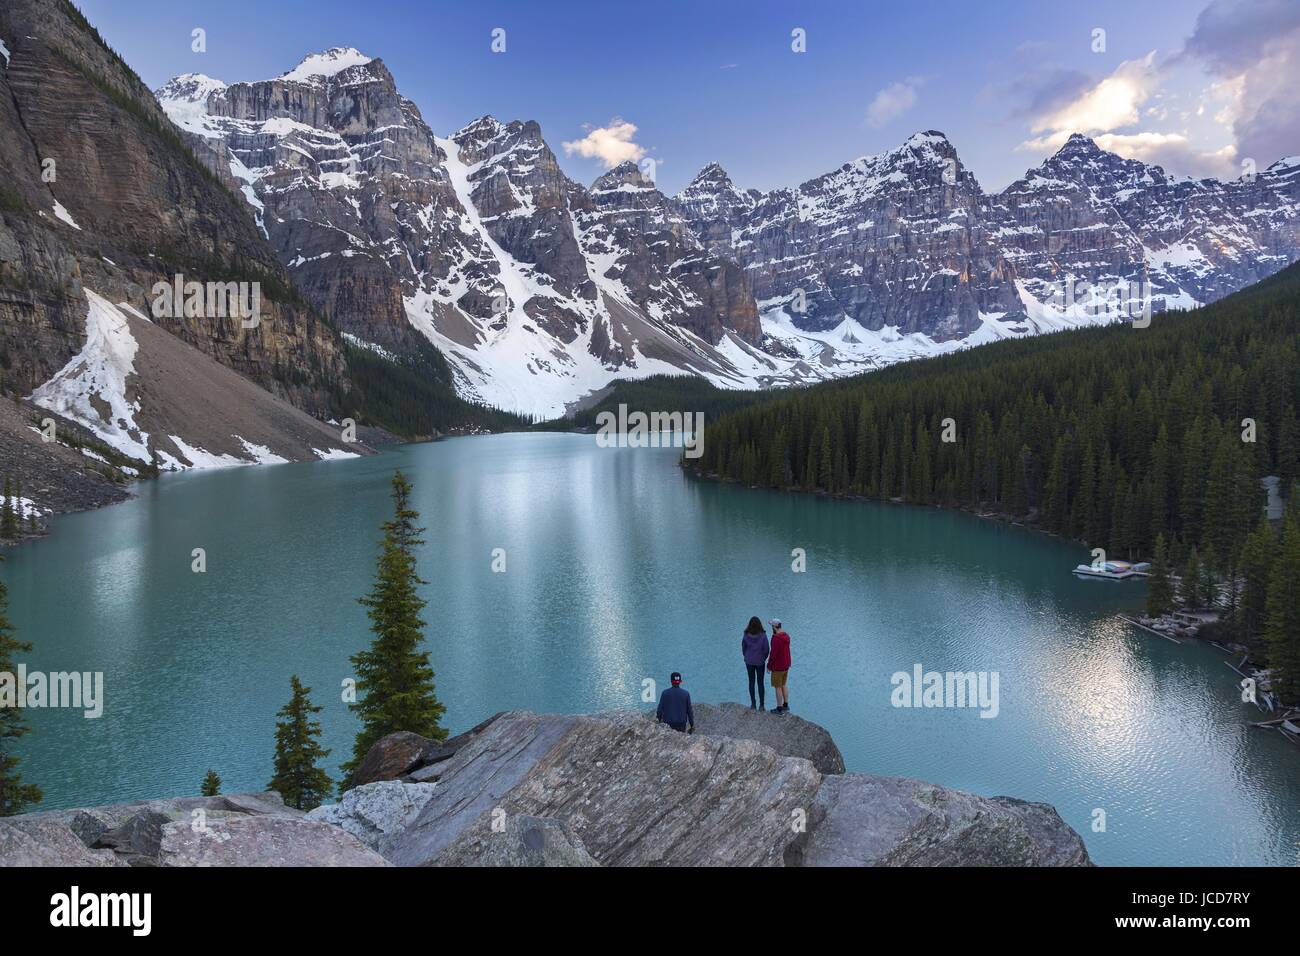 People Looking at Scenic Landscape View of Moraine Lake and Rocky Mountain Peaks. Banff National Park Alberta Canadian Rockies Stock Photo